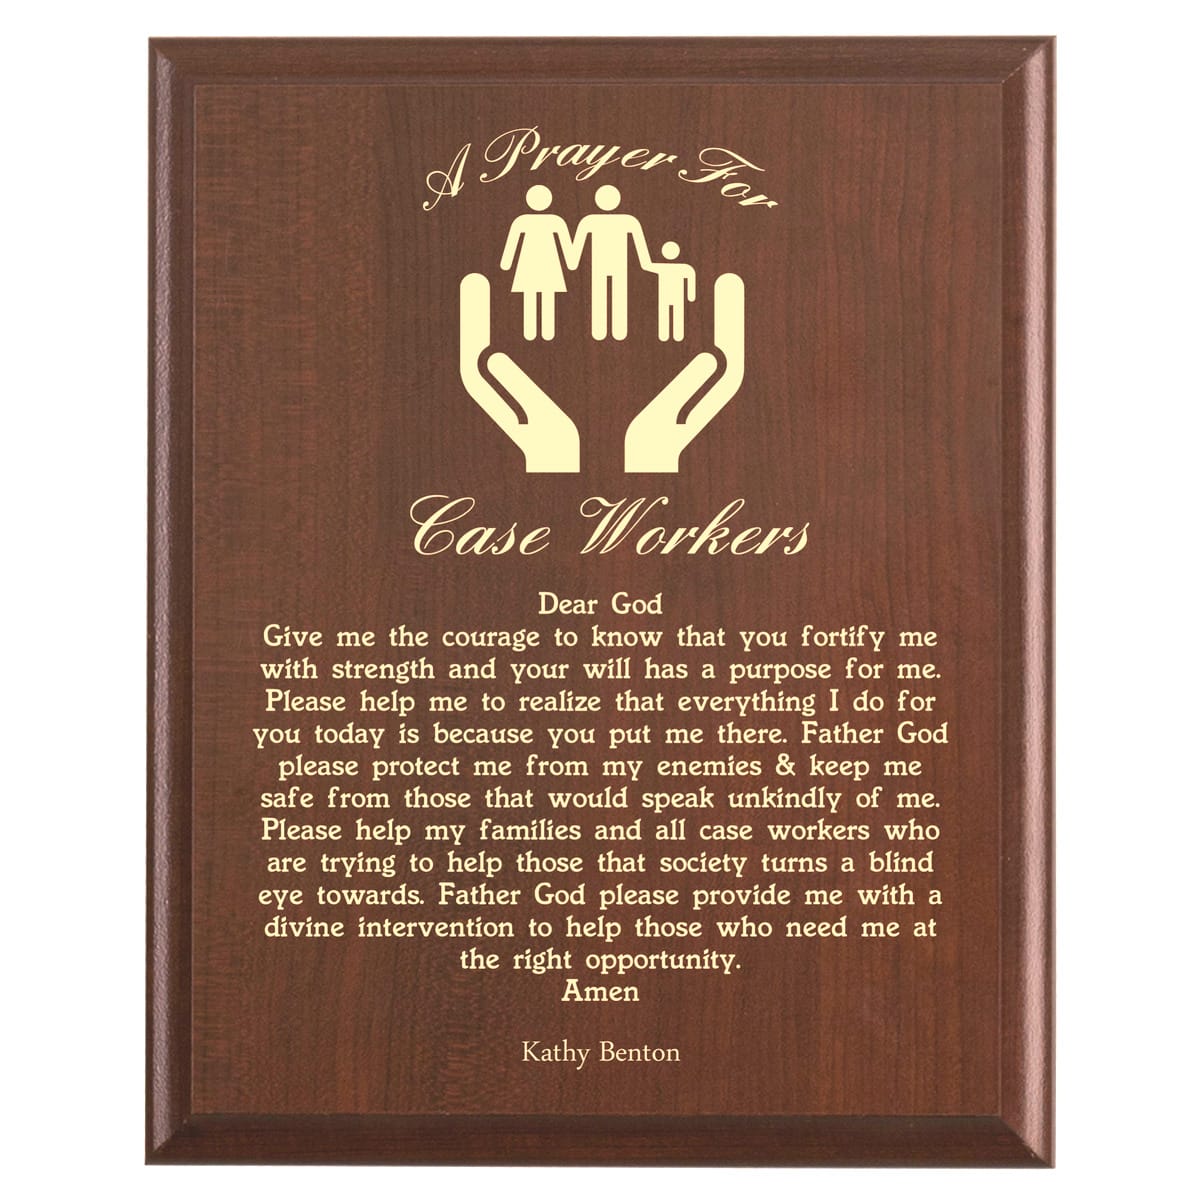 Plaque photo: Case Worker Prayer Plaque design with free personalization. Wood style finish with customized text.